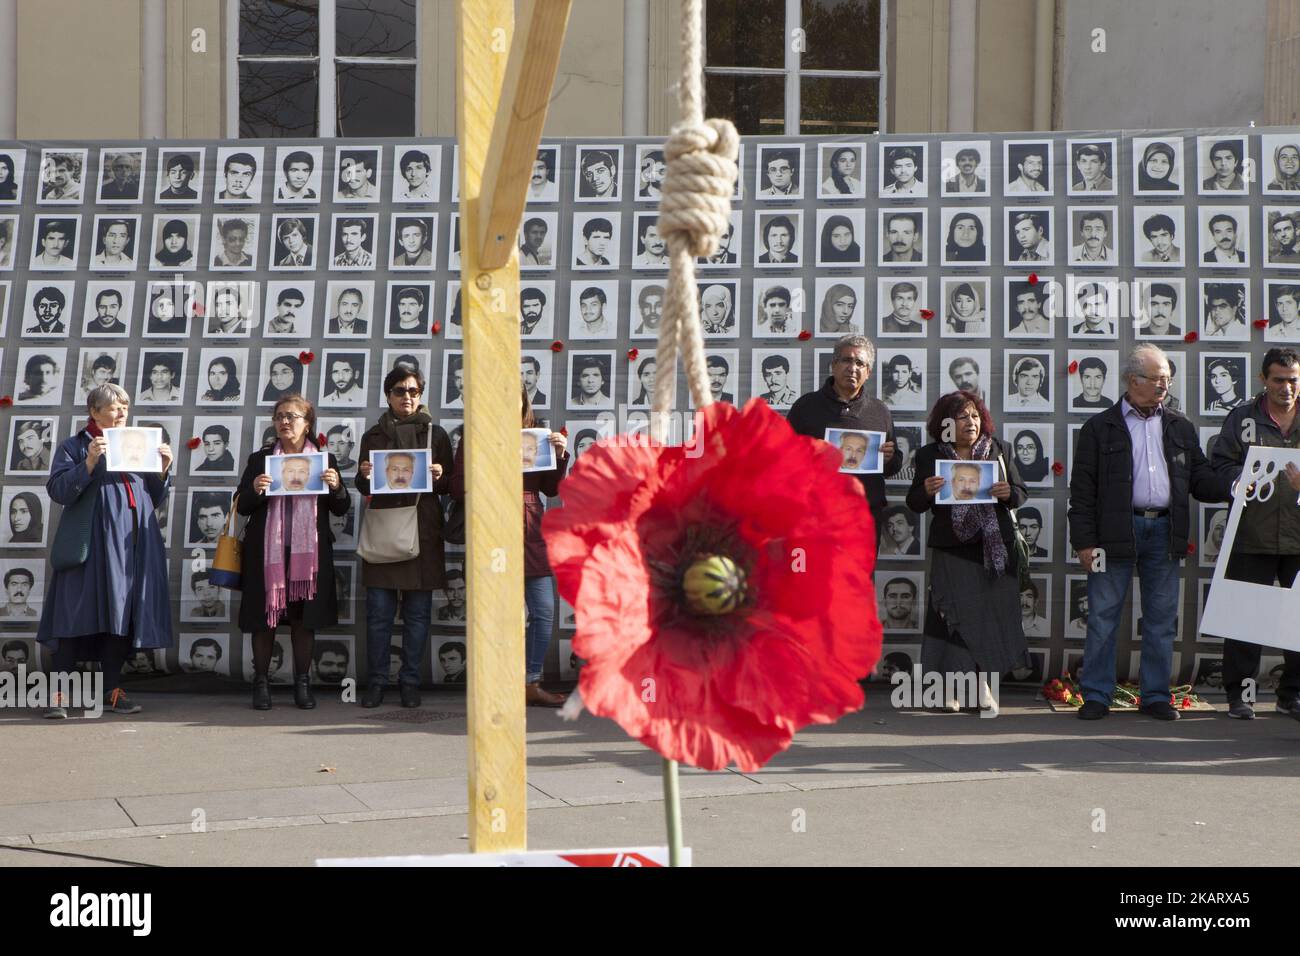 Hanging flowers exhibition at the Place Denfert Rochereau in Paris, France, on October 11, 2017. In memory of the thousands of students massacred in Iran in the summer of 1988. International Day of the Girl increases awareness of issues faced by girls around the world. (Photo by Siavosh Hosseini/NurPhoto) Stock Photo